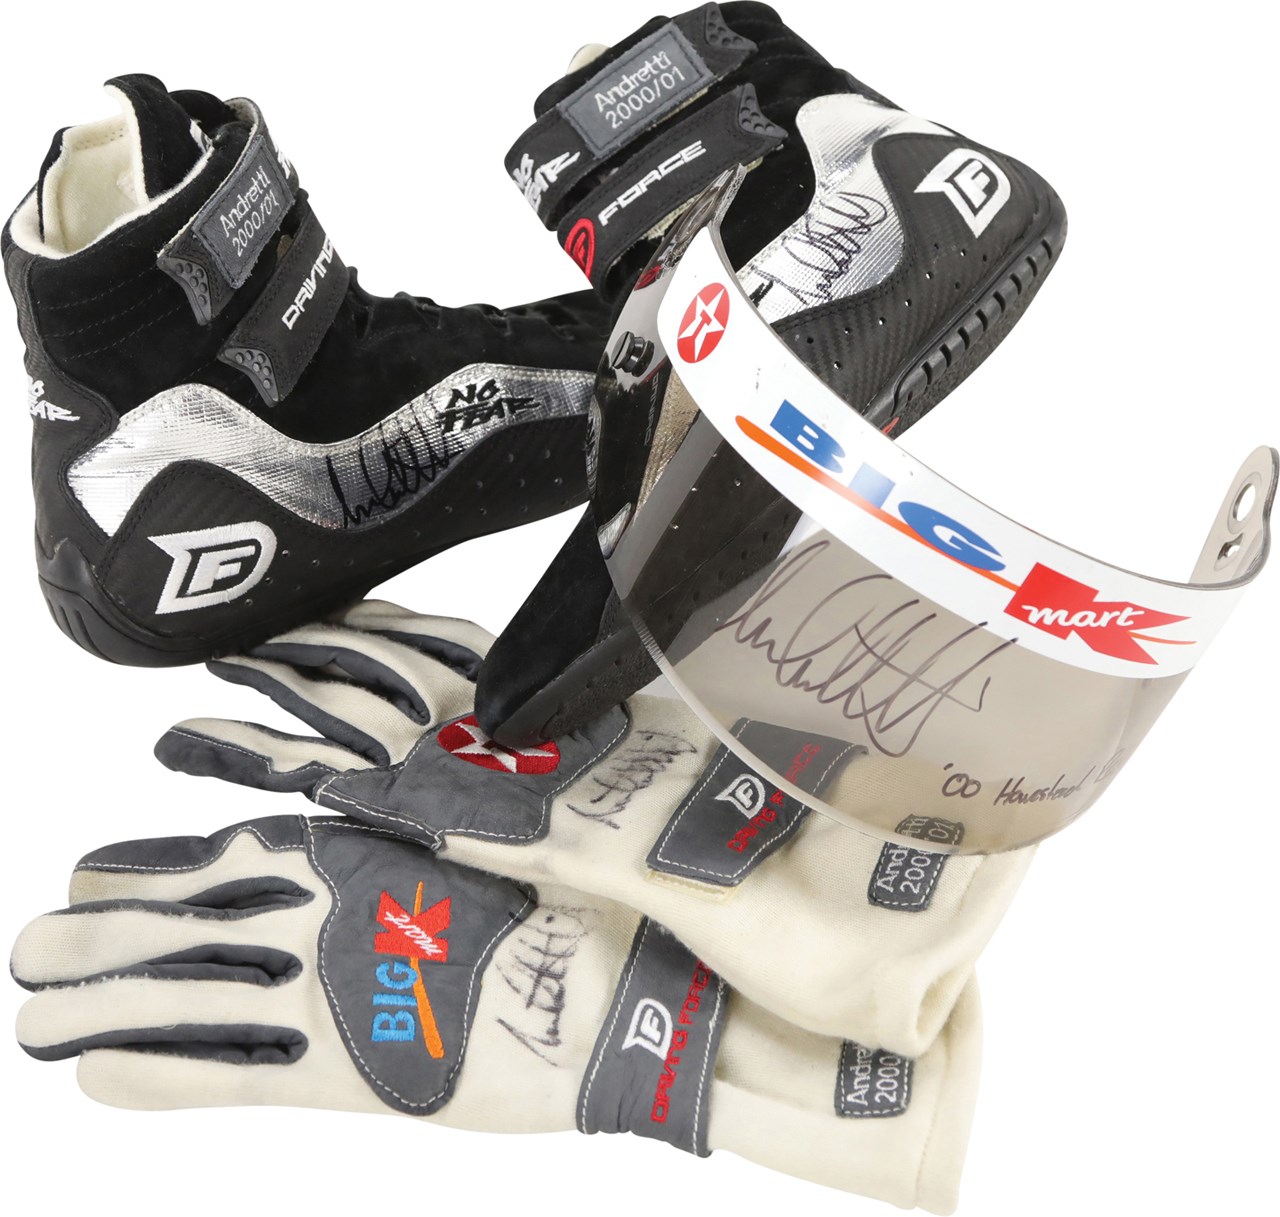 2000 Michael Andretti Race Used Gloves, Shoes, and Visor